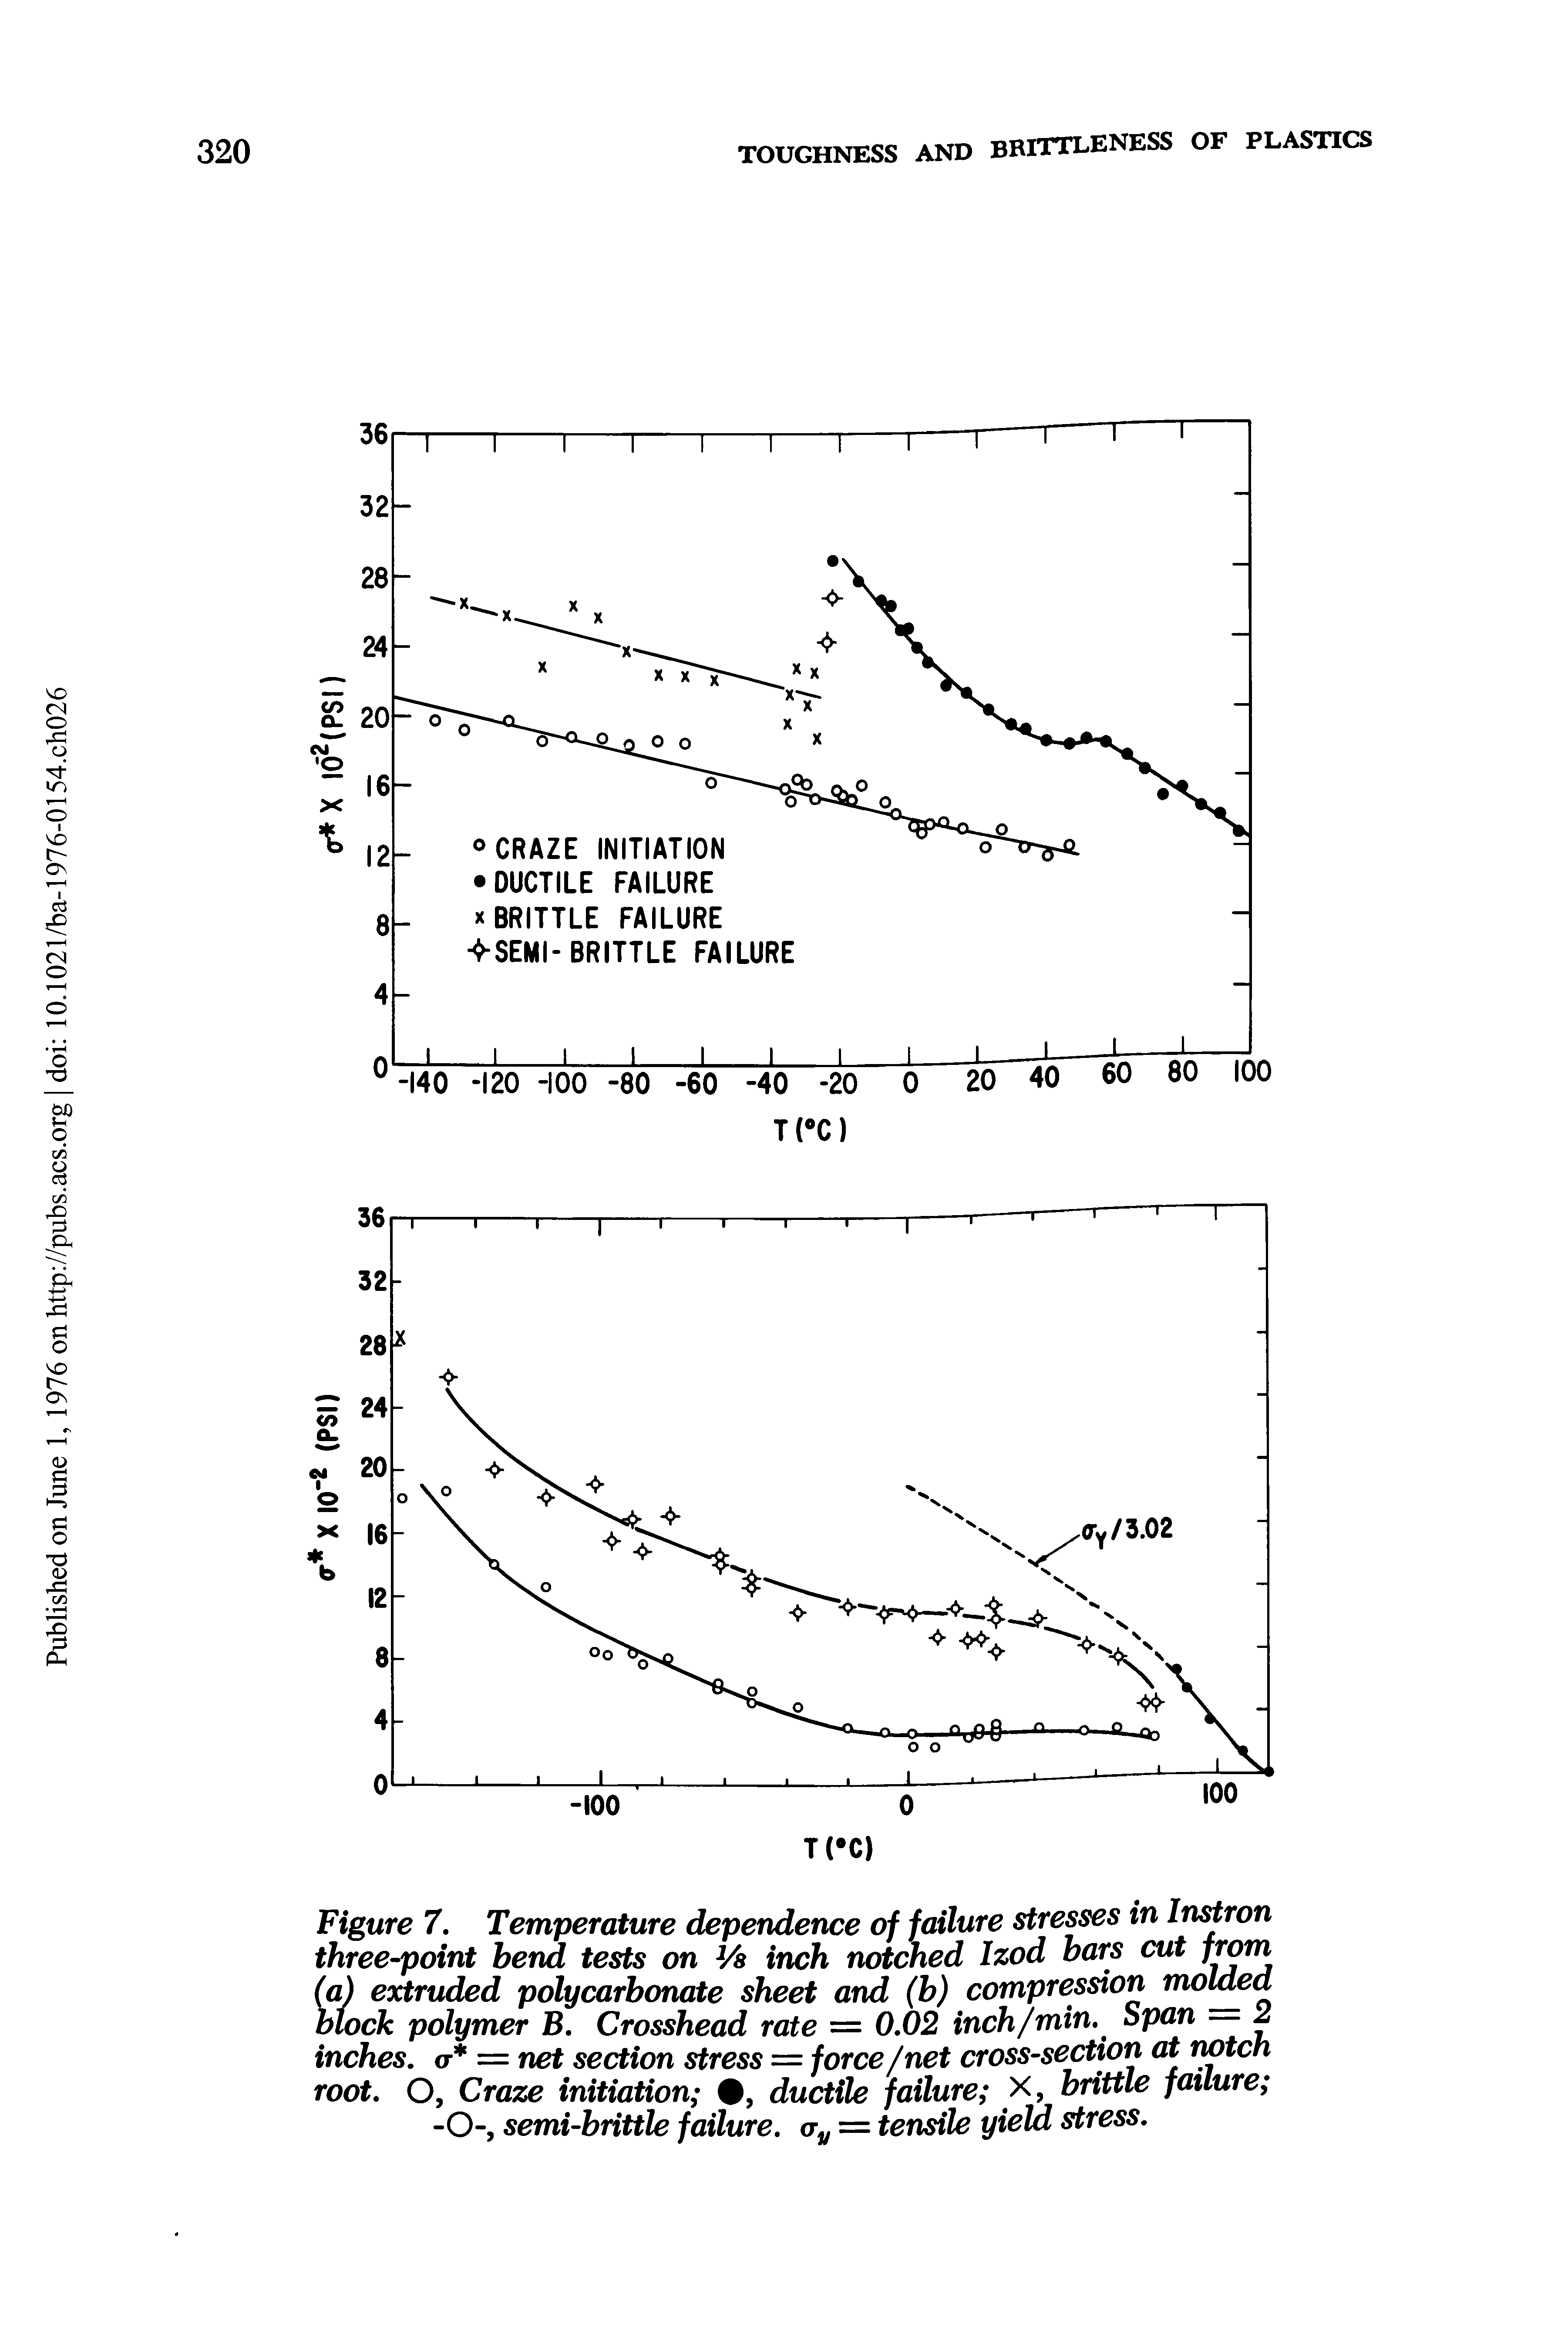 Figure 7, Temperature dependence of failure stresses in Instron three-point bend tests on Vs inch notched Izod bars cut from (a) extruded polycarbonate sheet and (b) compression molded block polymer B. Crosshead rate = 0,02 inch /min. Span = 2 inches, o = net section stress = force/net cross-section at notch root, O, Craze initiation , ductile failure X, brittle failure ...